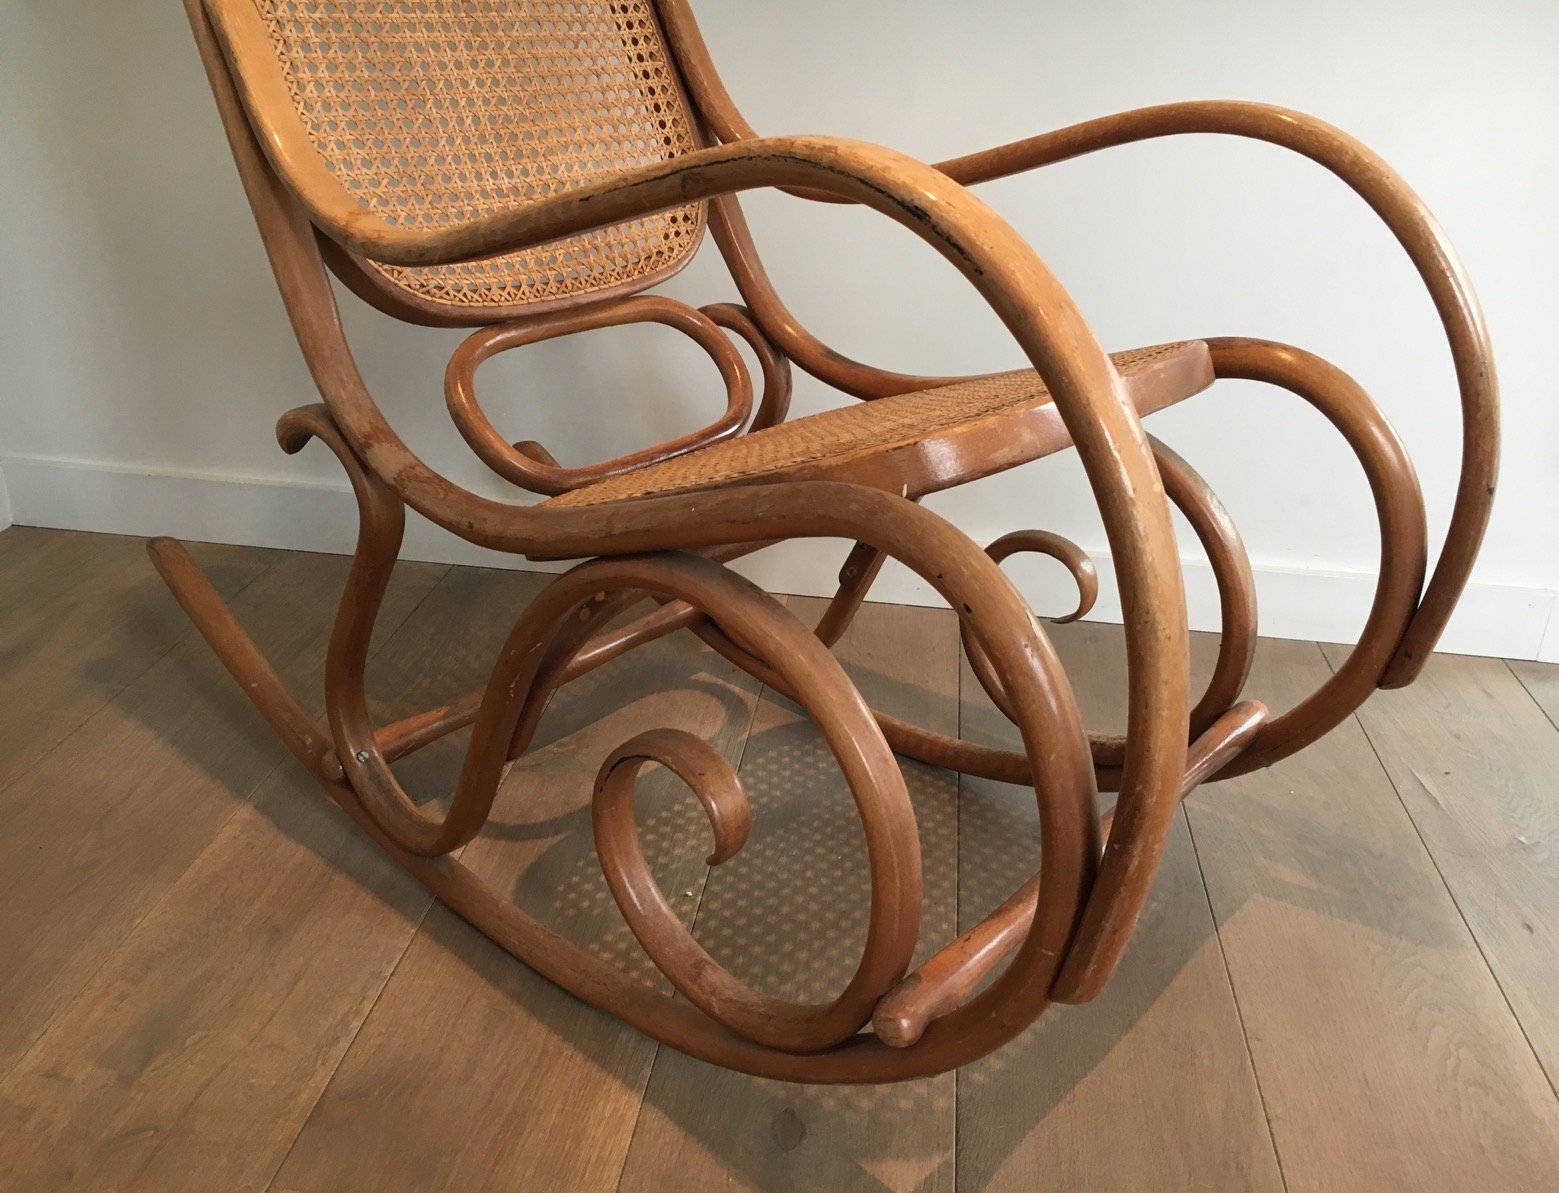 Vintage Bentwood Rocking Chair, 1970s for sale at Pamono